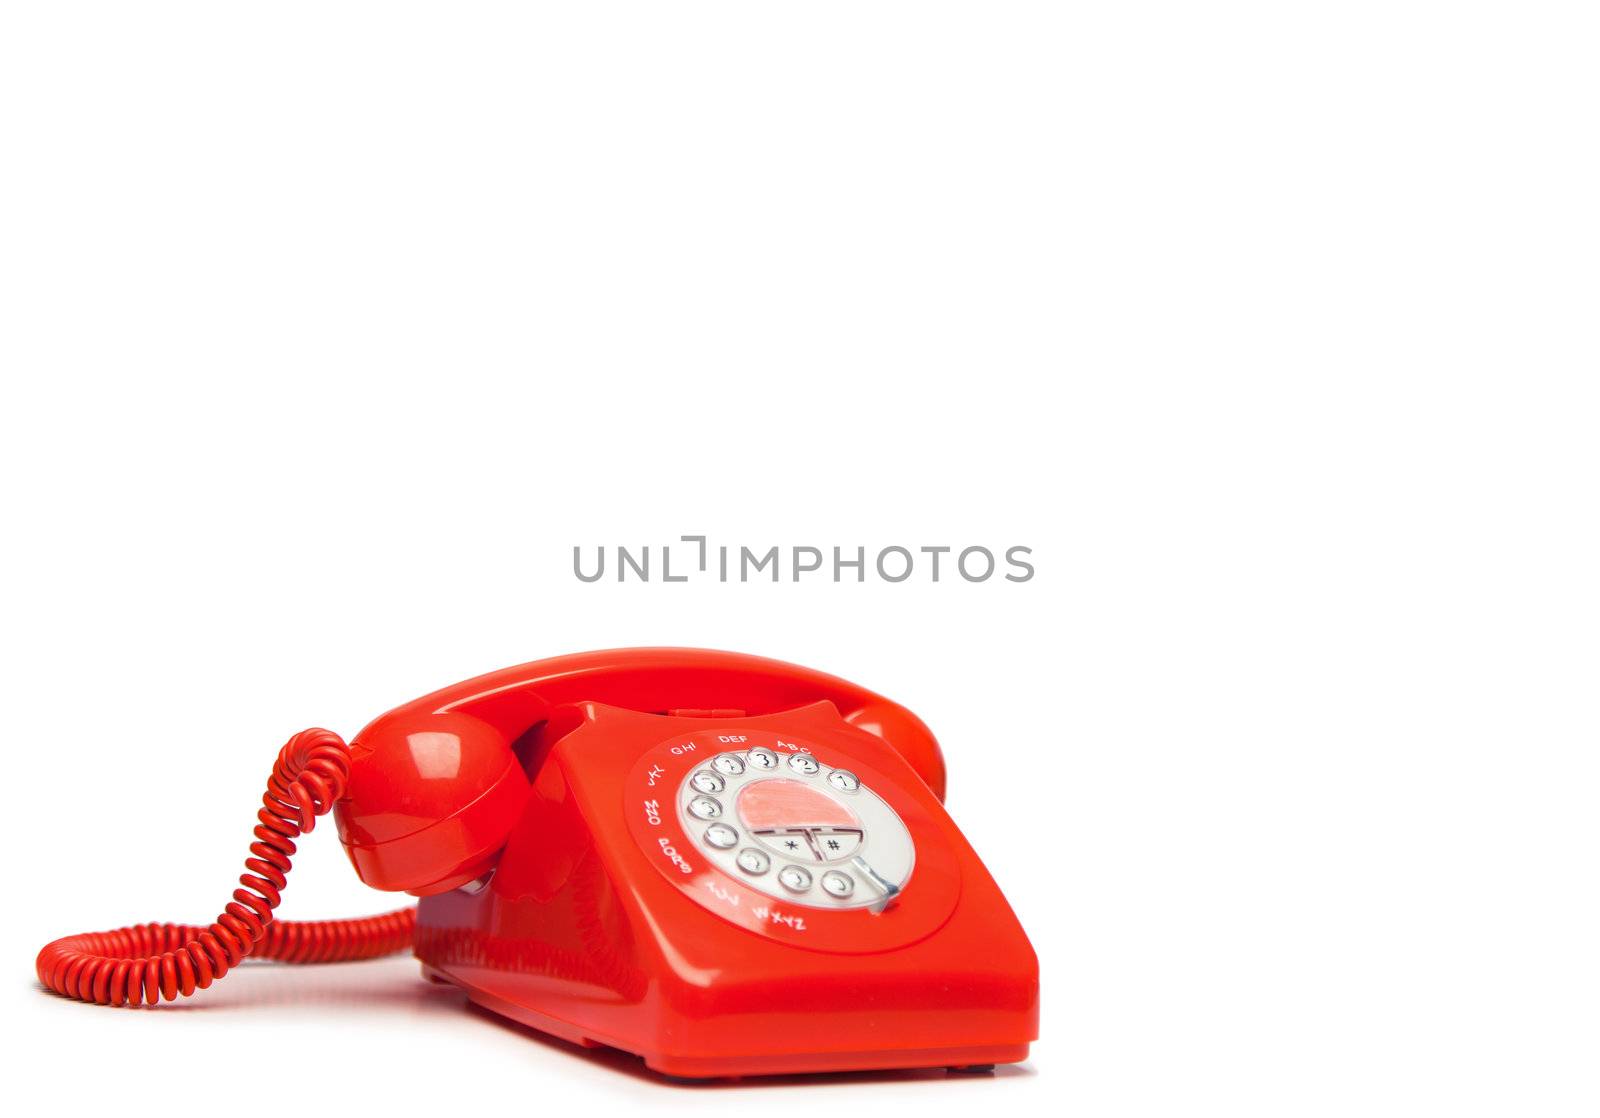 Fashion red phone on a white background